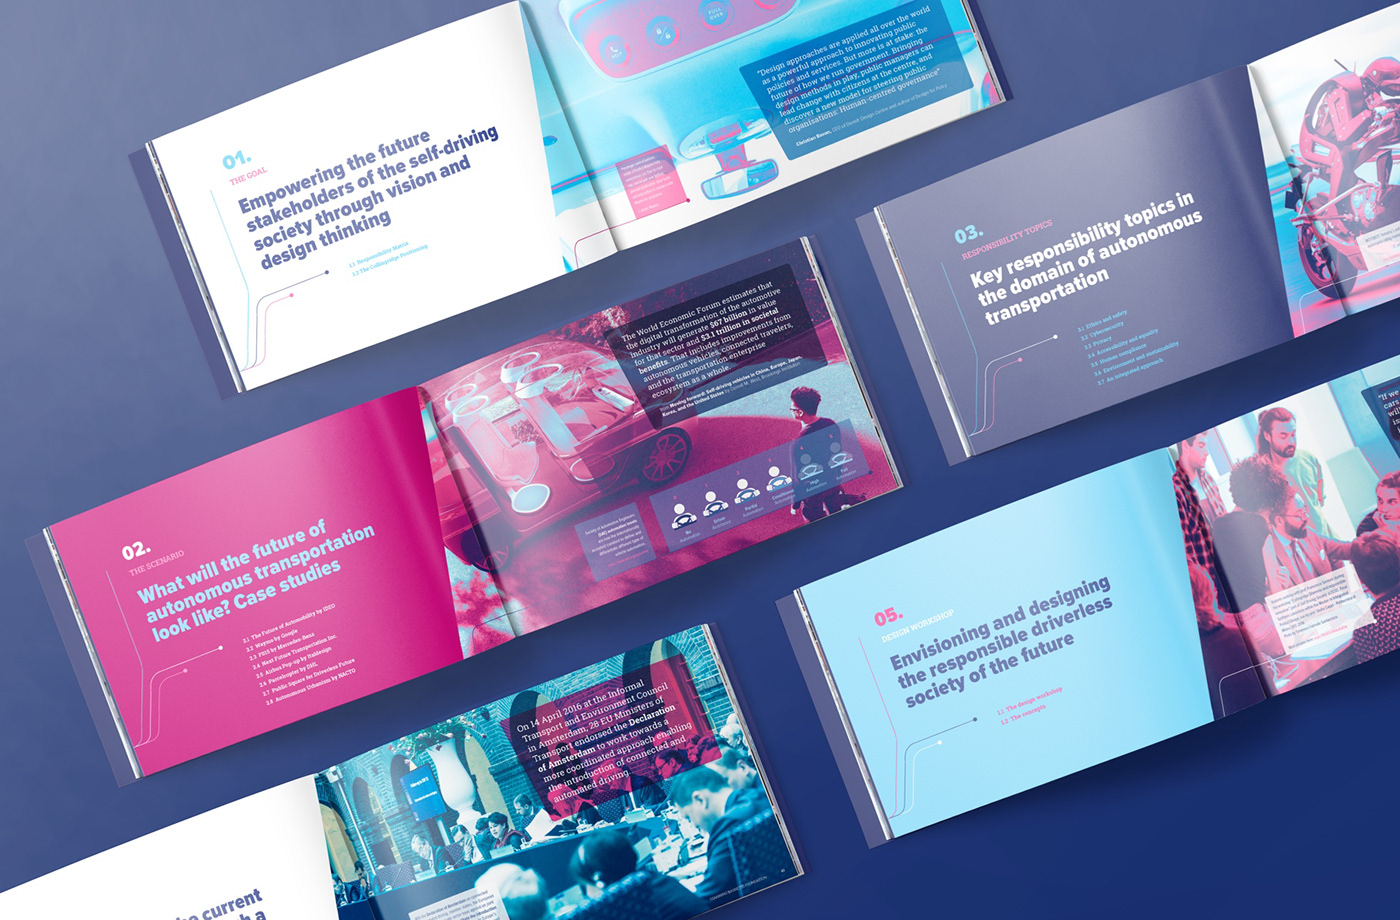 Multicolor open brochures, showing the graphic design of chapter covers